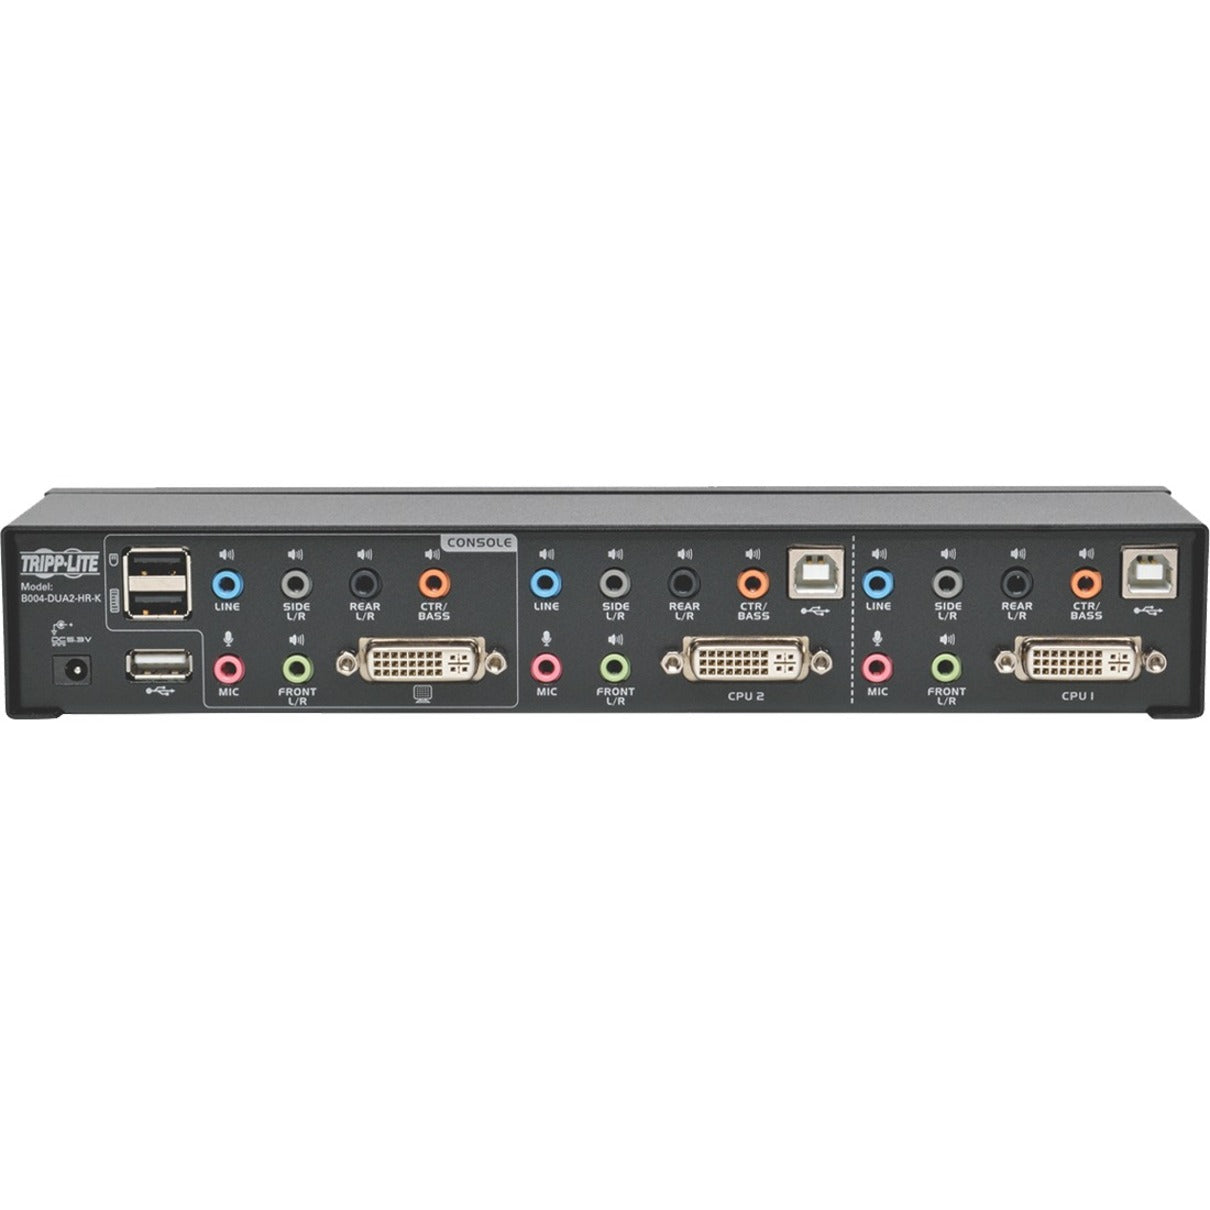 Tripp Lite B004-DUA2-HR-K 2-Port DVI Dual-Link / USB KVM Switch with Audio and Cables, WQUXGA, 2560 x 1600, TAA Compliant, 3 Year Warranty